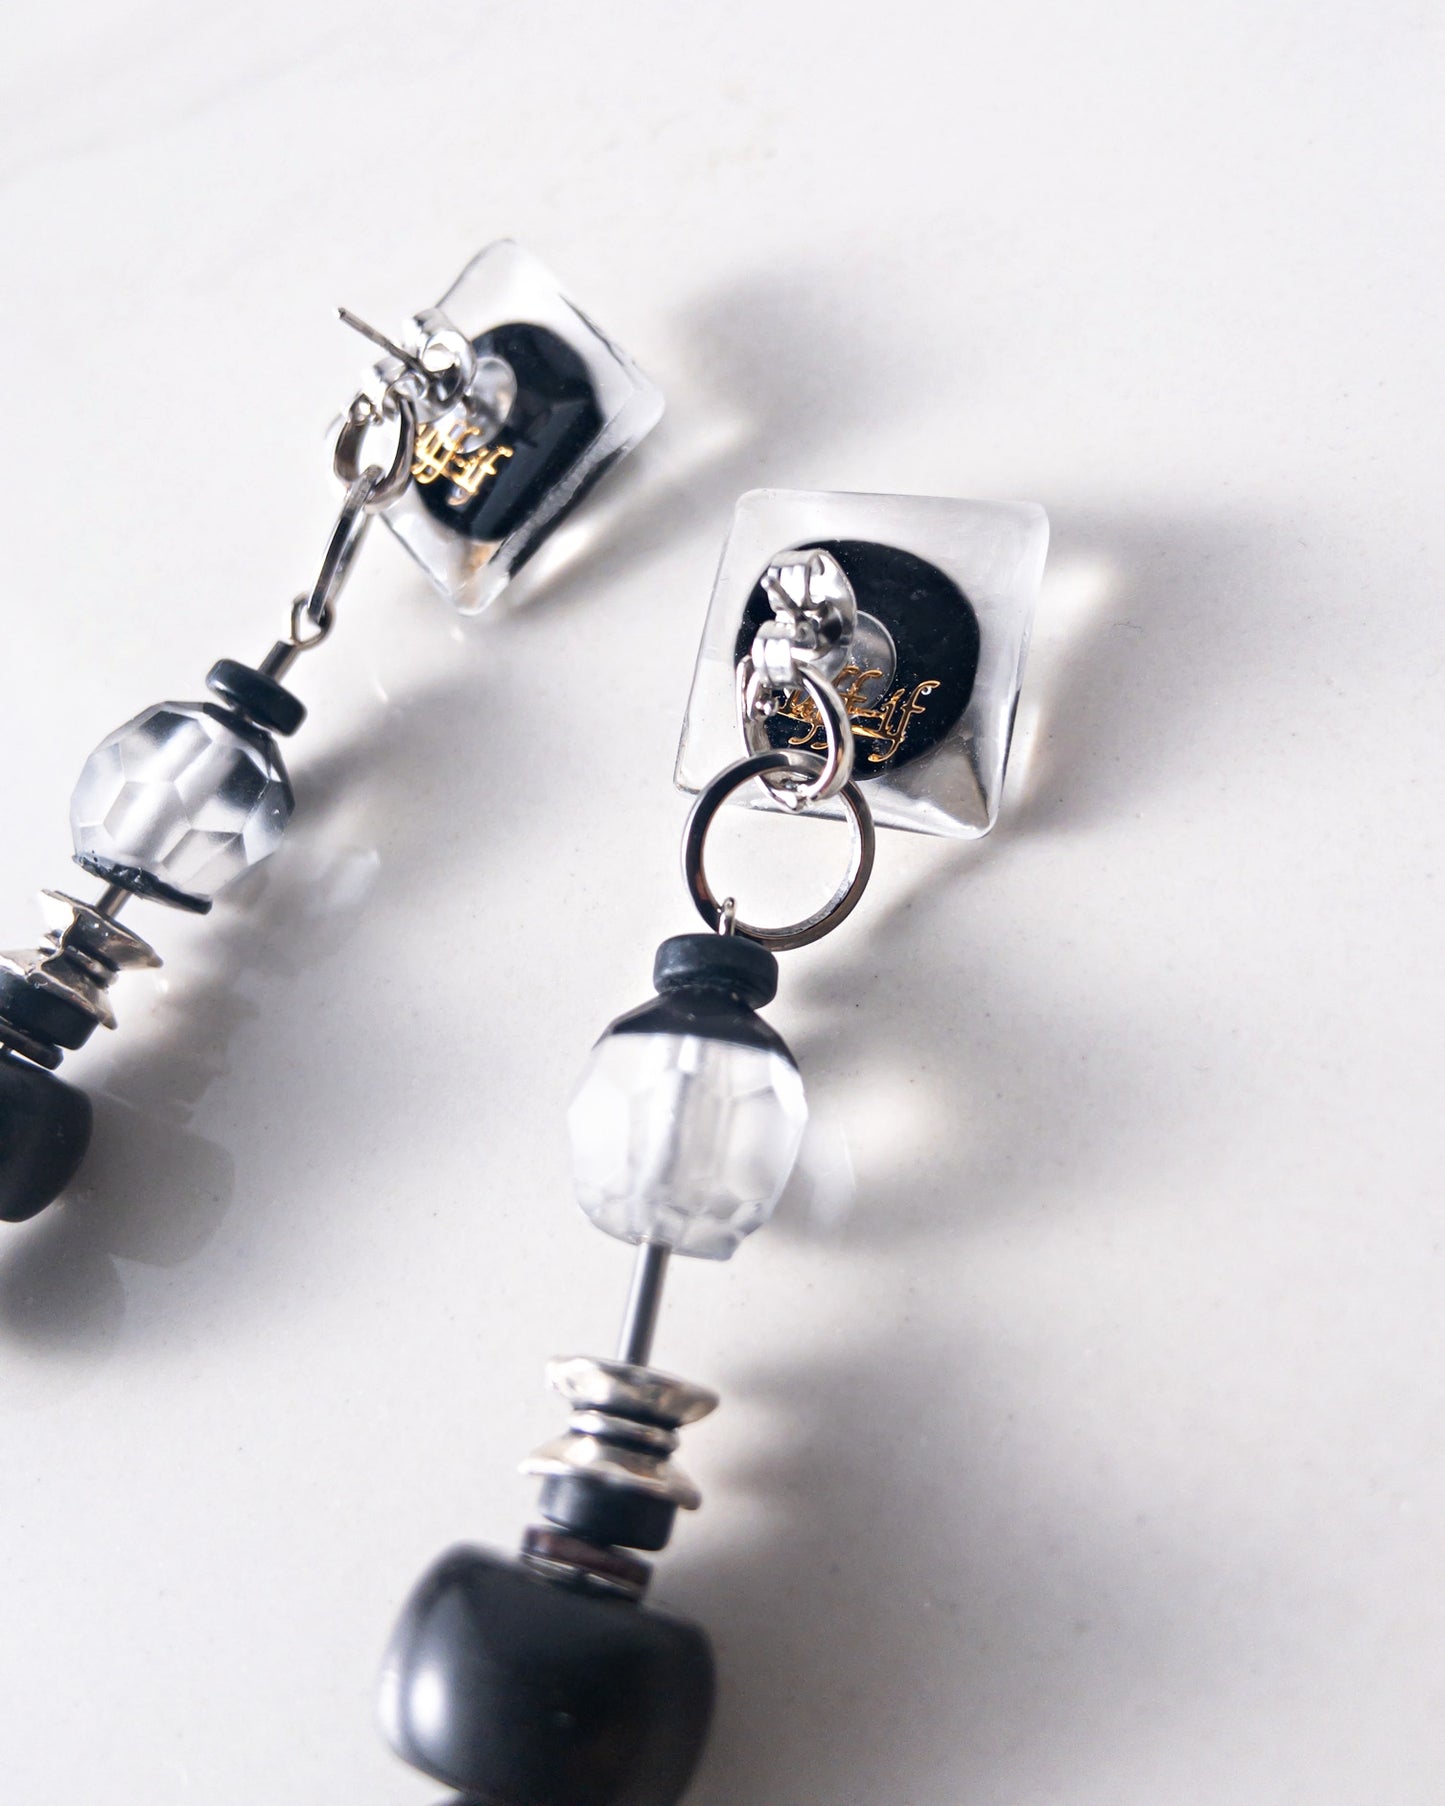 Connecting parts/pierced earring catches ピアスキャッチ用連結パーツ